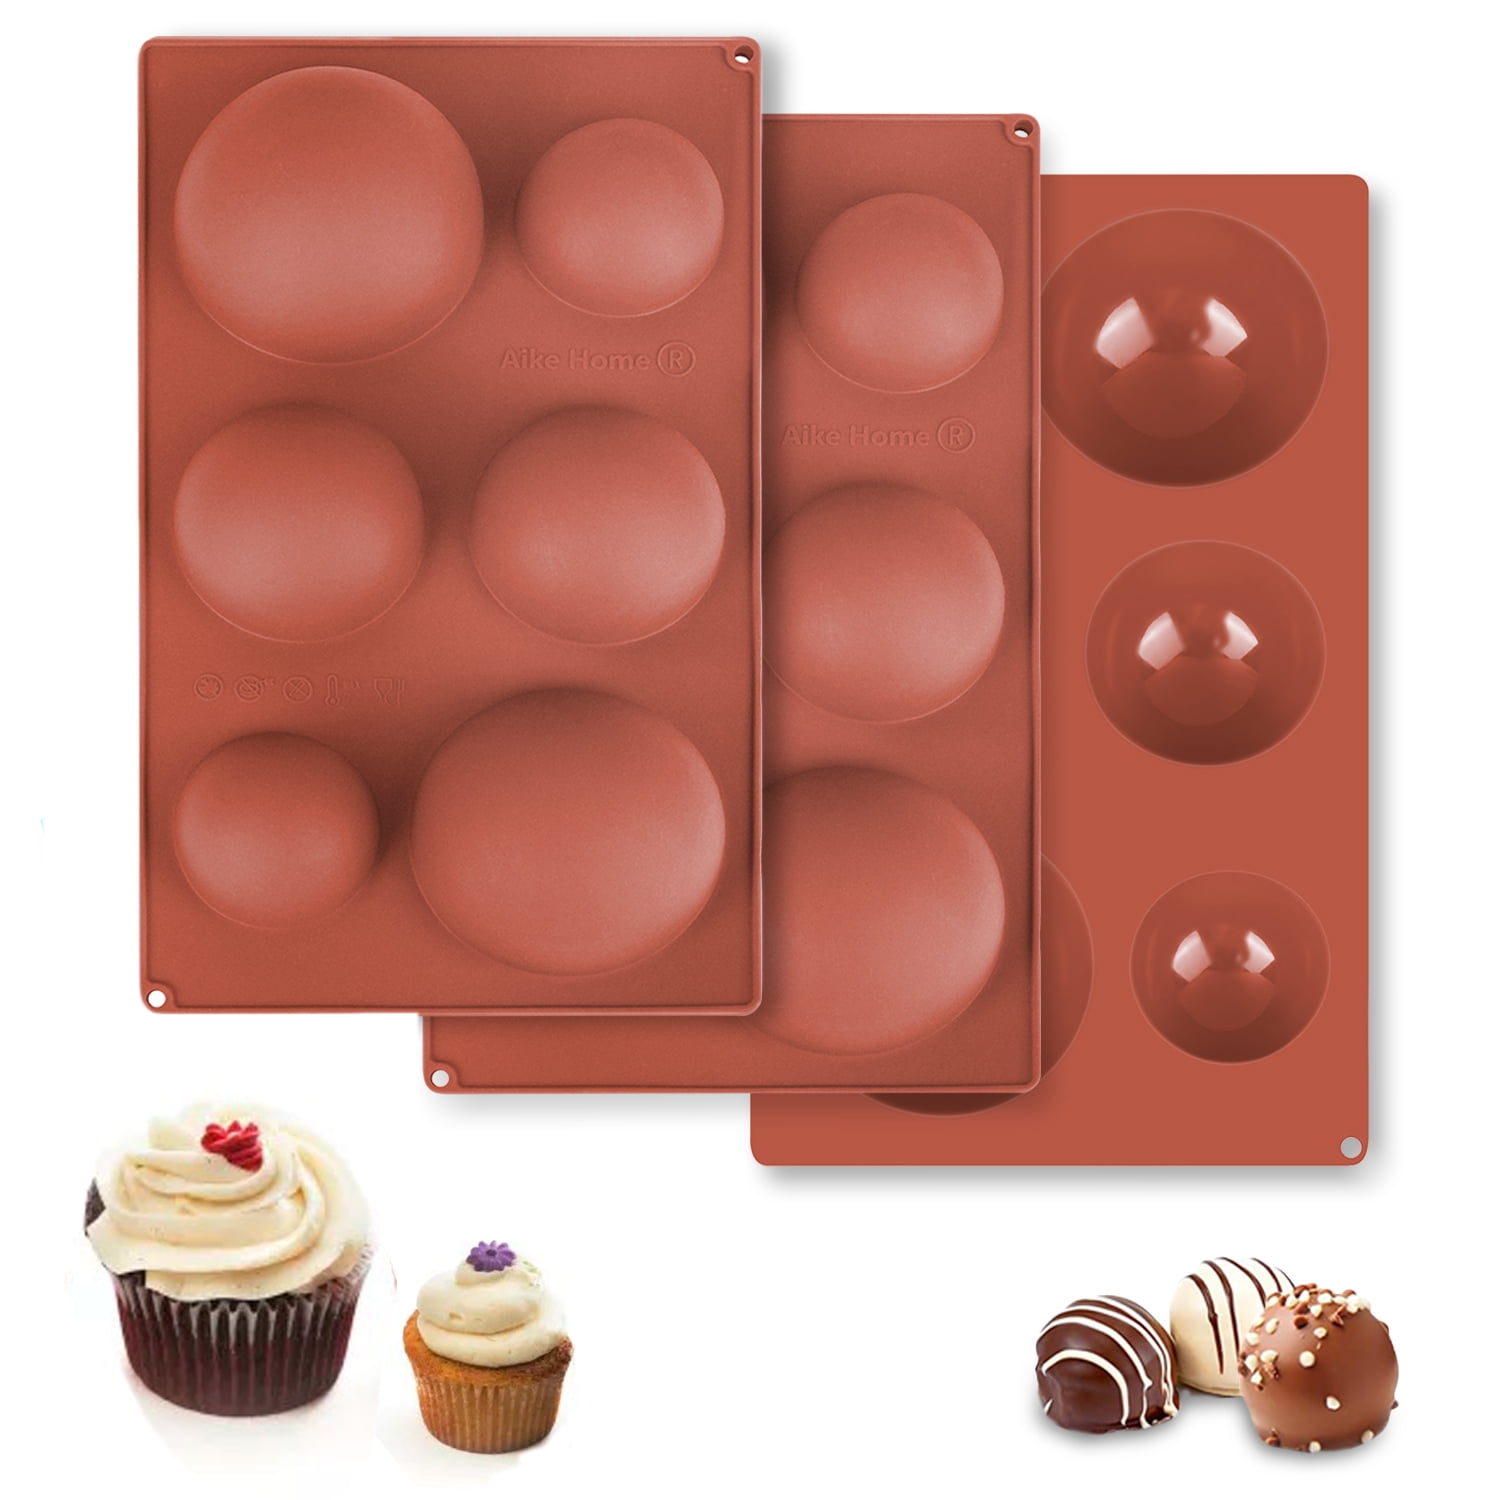 Details about   Reusable 6 Grid 3D Peach Cake Mold Silicone Mousse Dessert Mould Baking Tool 